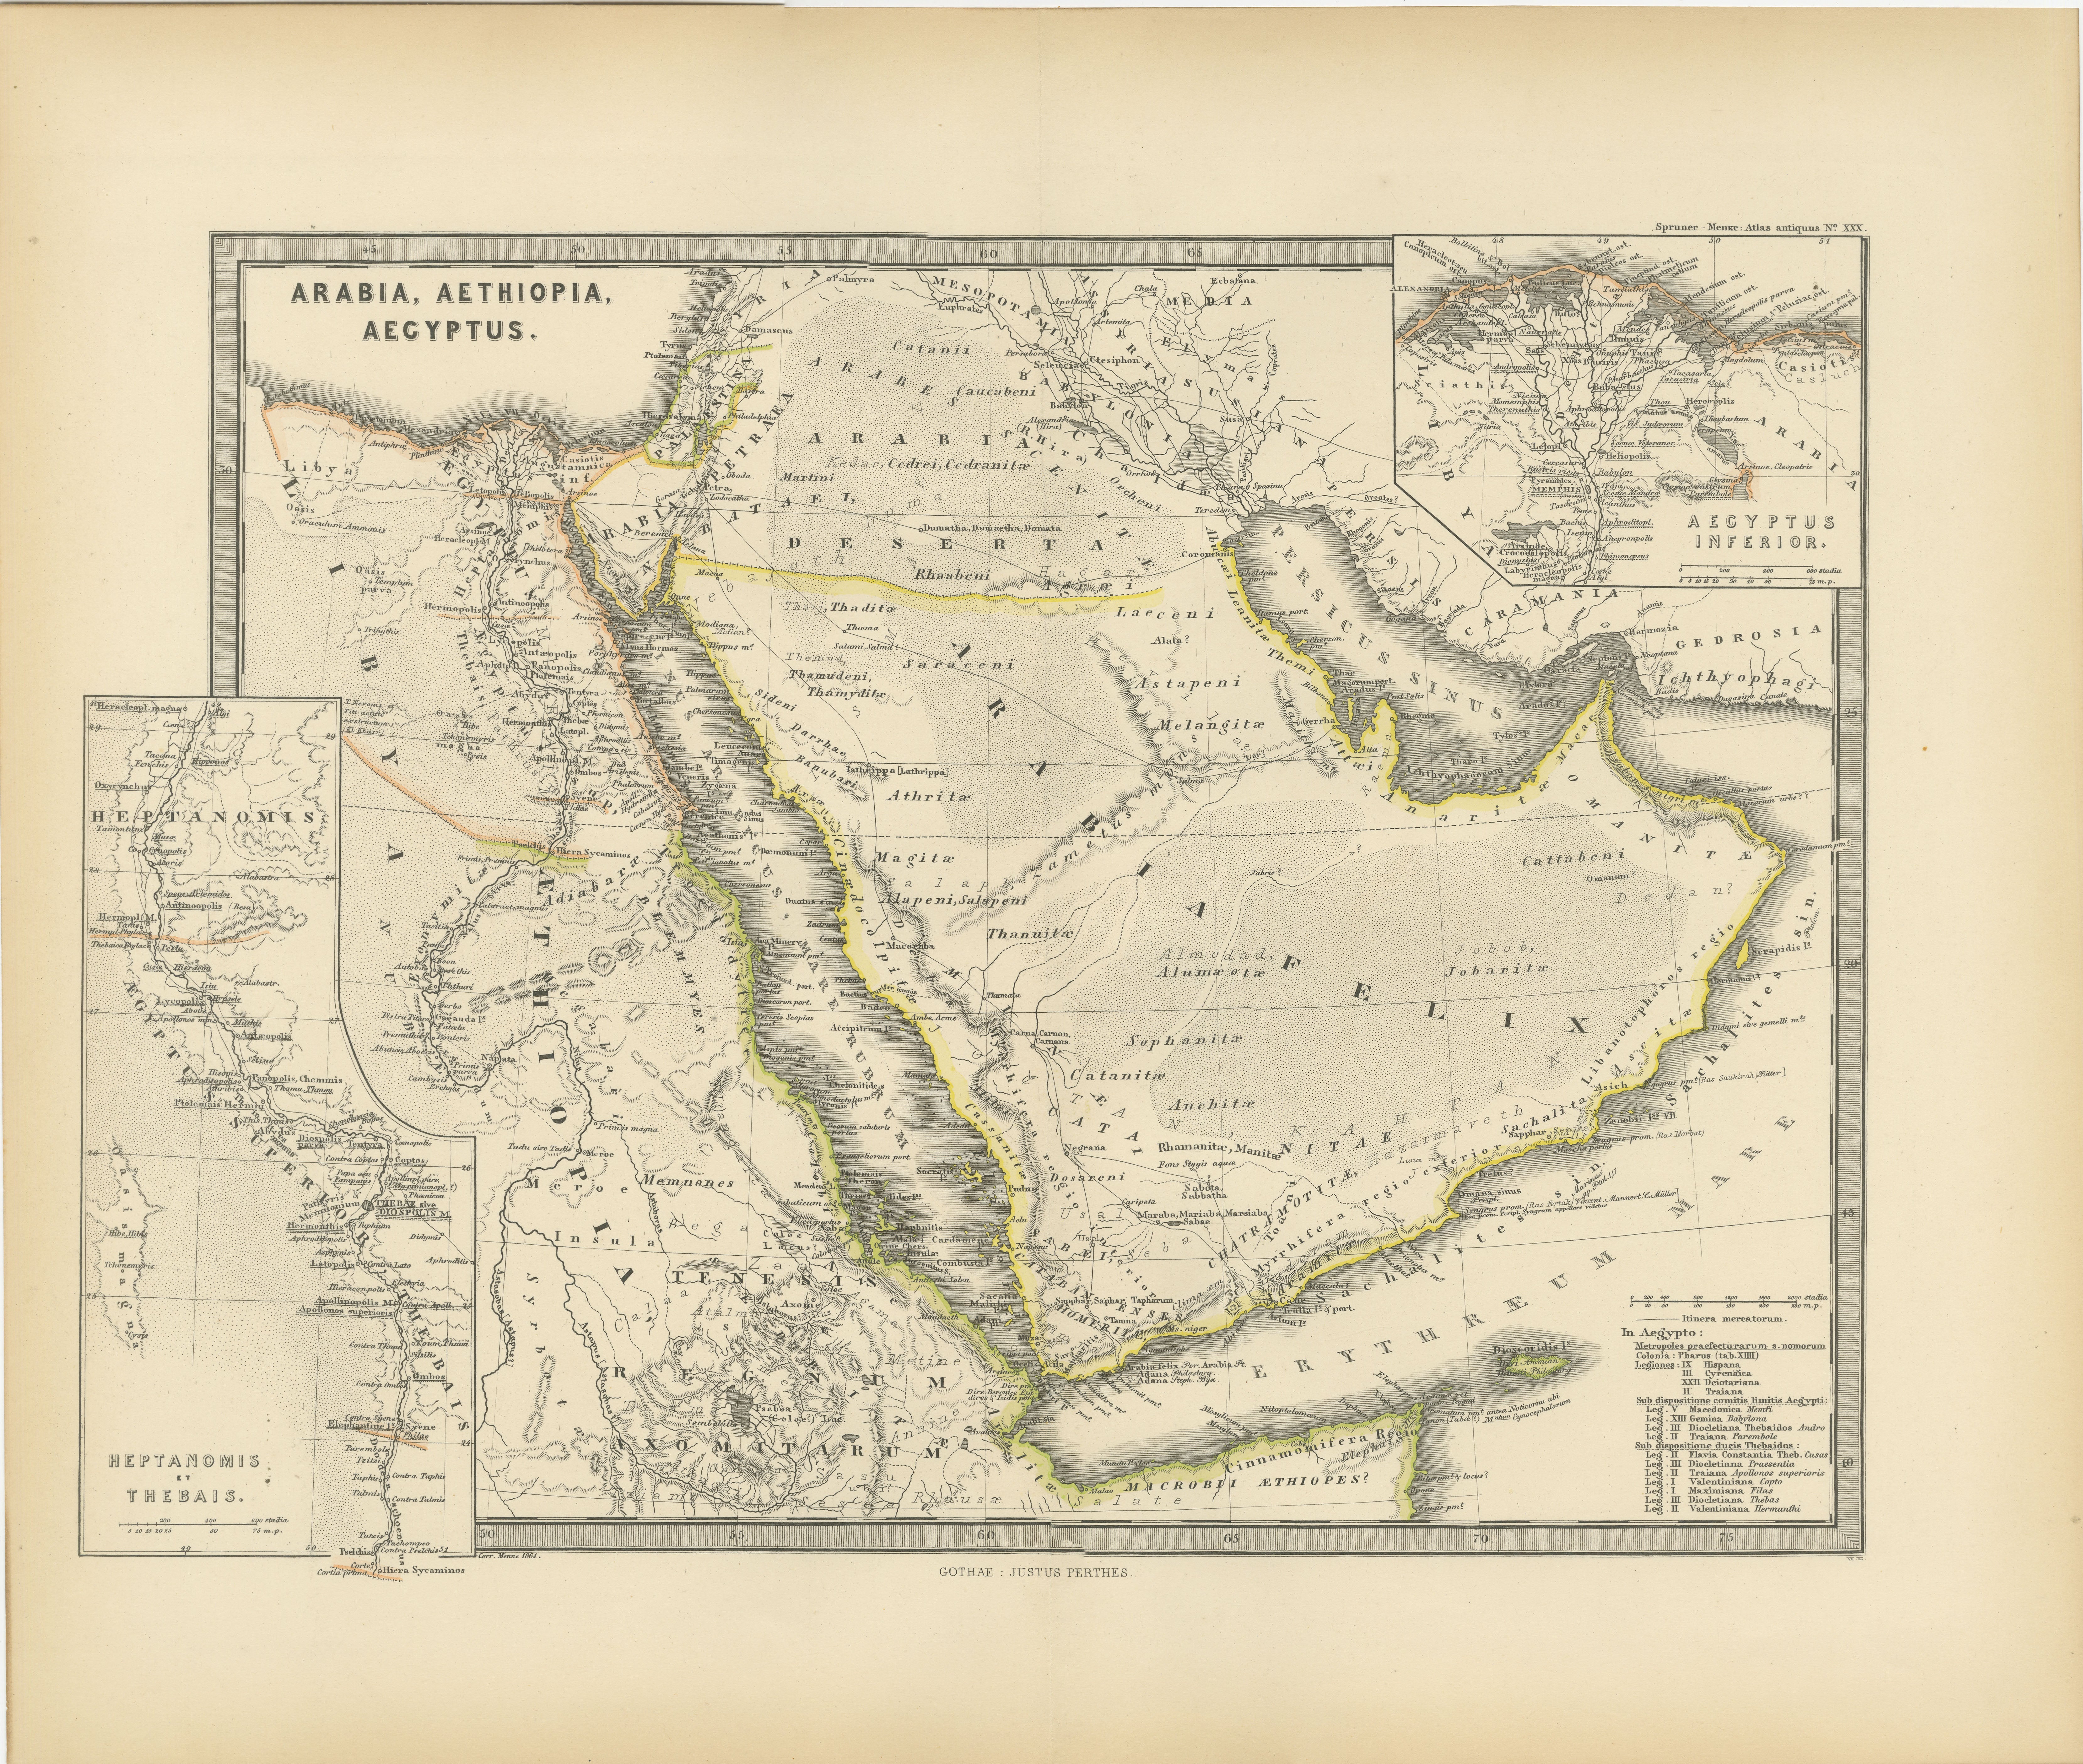 Ancient Realms of Northeast Africa: Arabia, Ethiopia, and Egypt, Published 1880